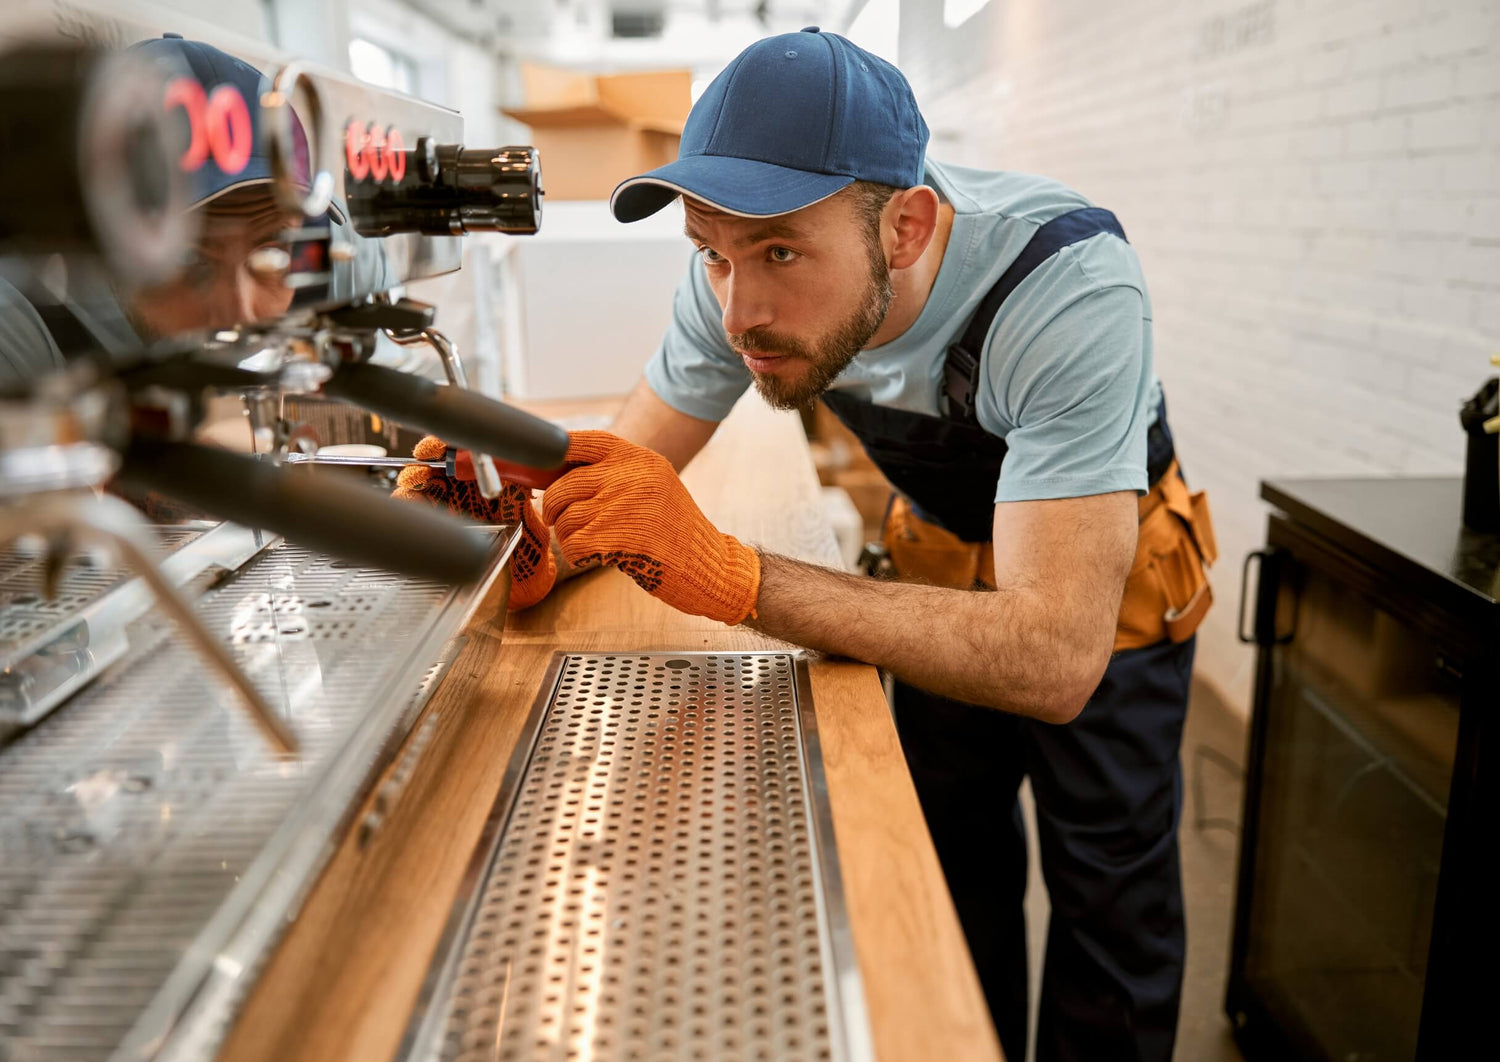 An appliance mechanic working on an espresso machine in a cafe